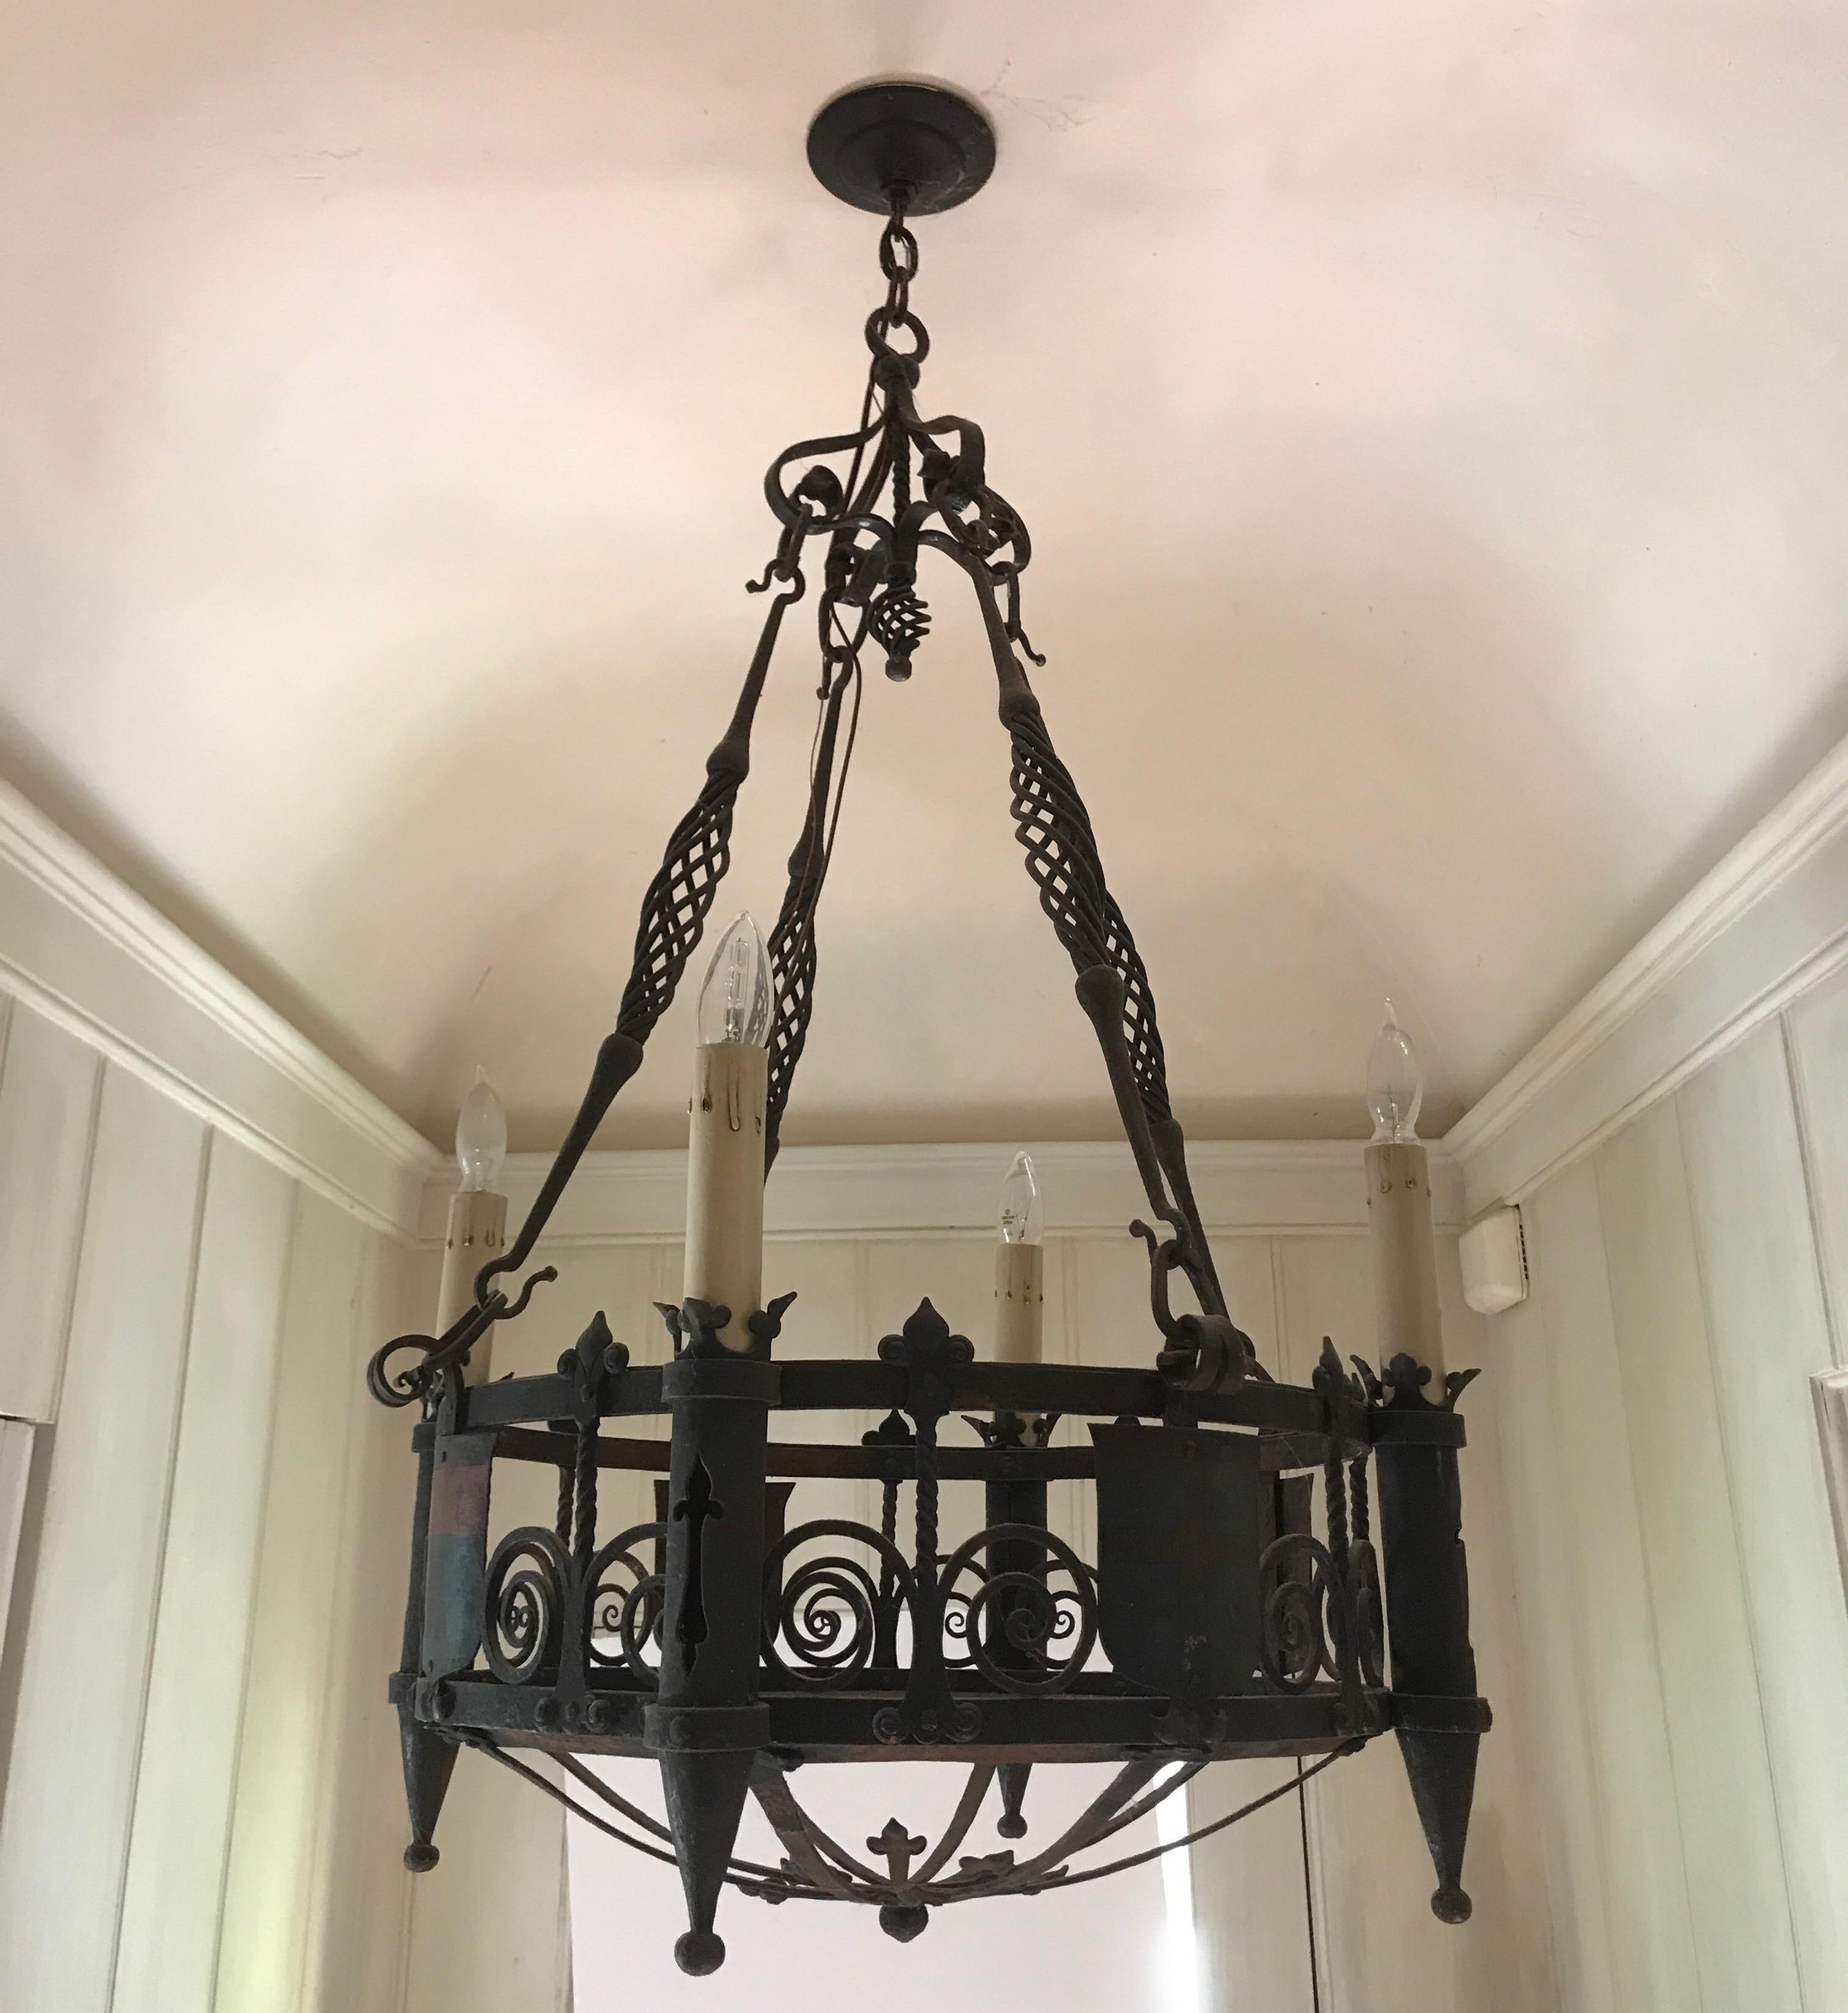 19th Century Iron Five-Light Round Chandelier with Decorative Crest Shields In Excellent Condition For Sale In Nashville, TN